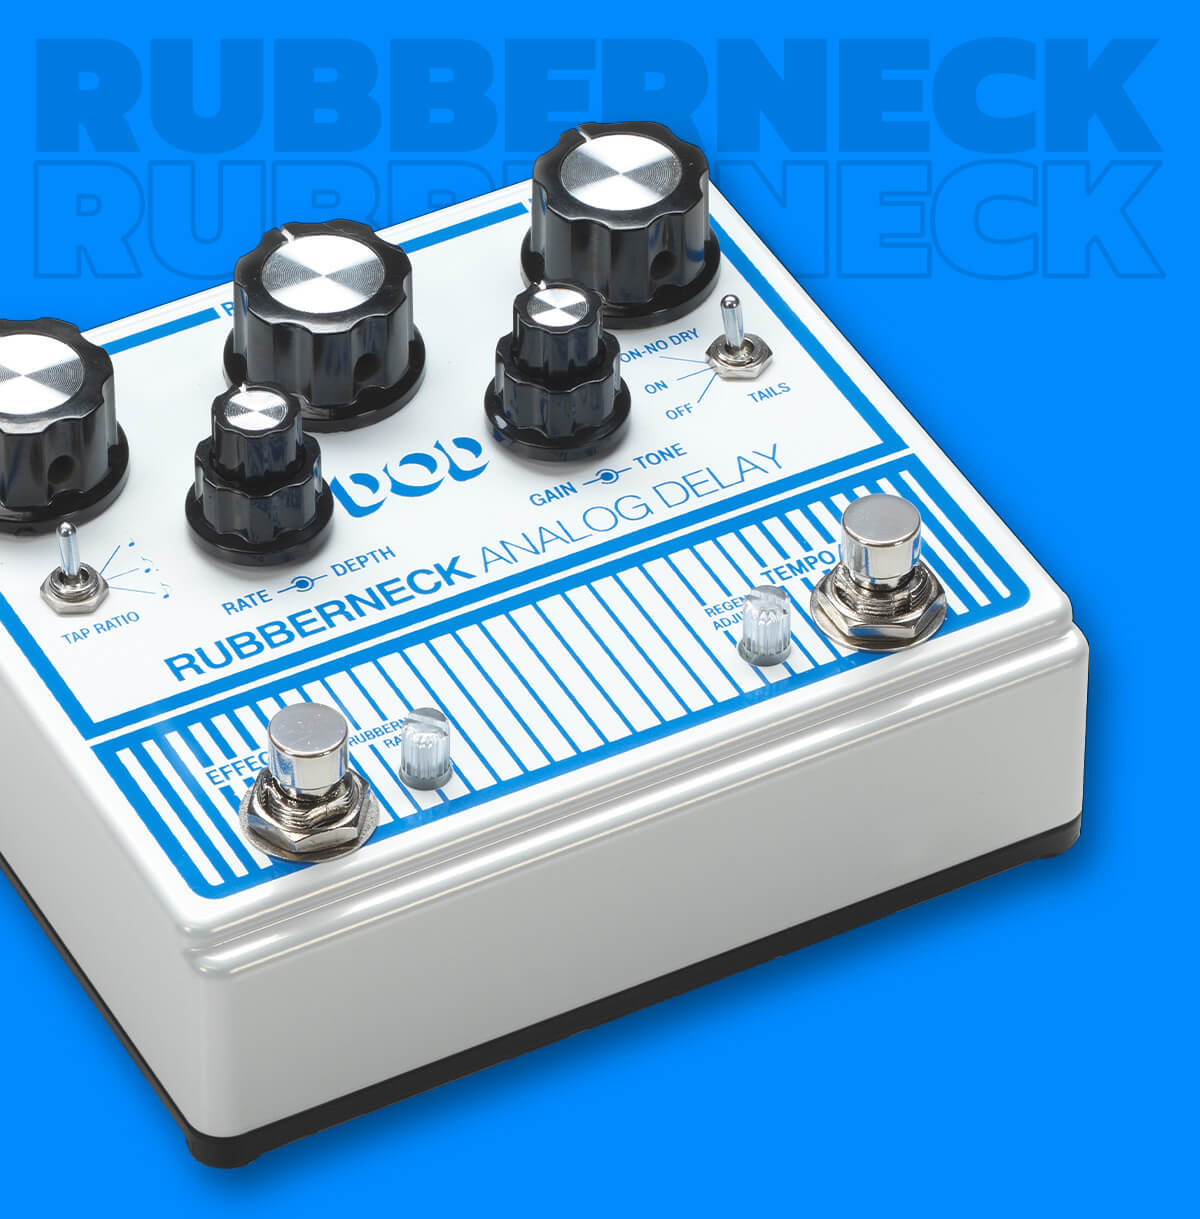 DOD Rubberneck analog delay in white with blue graphics, blue background that says 